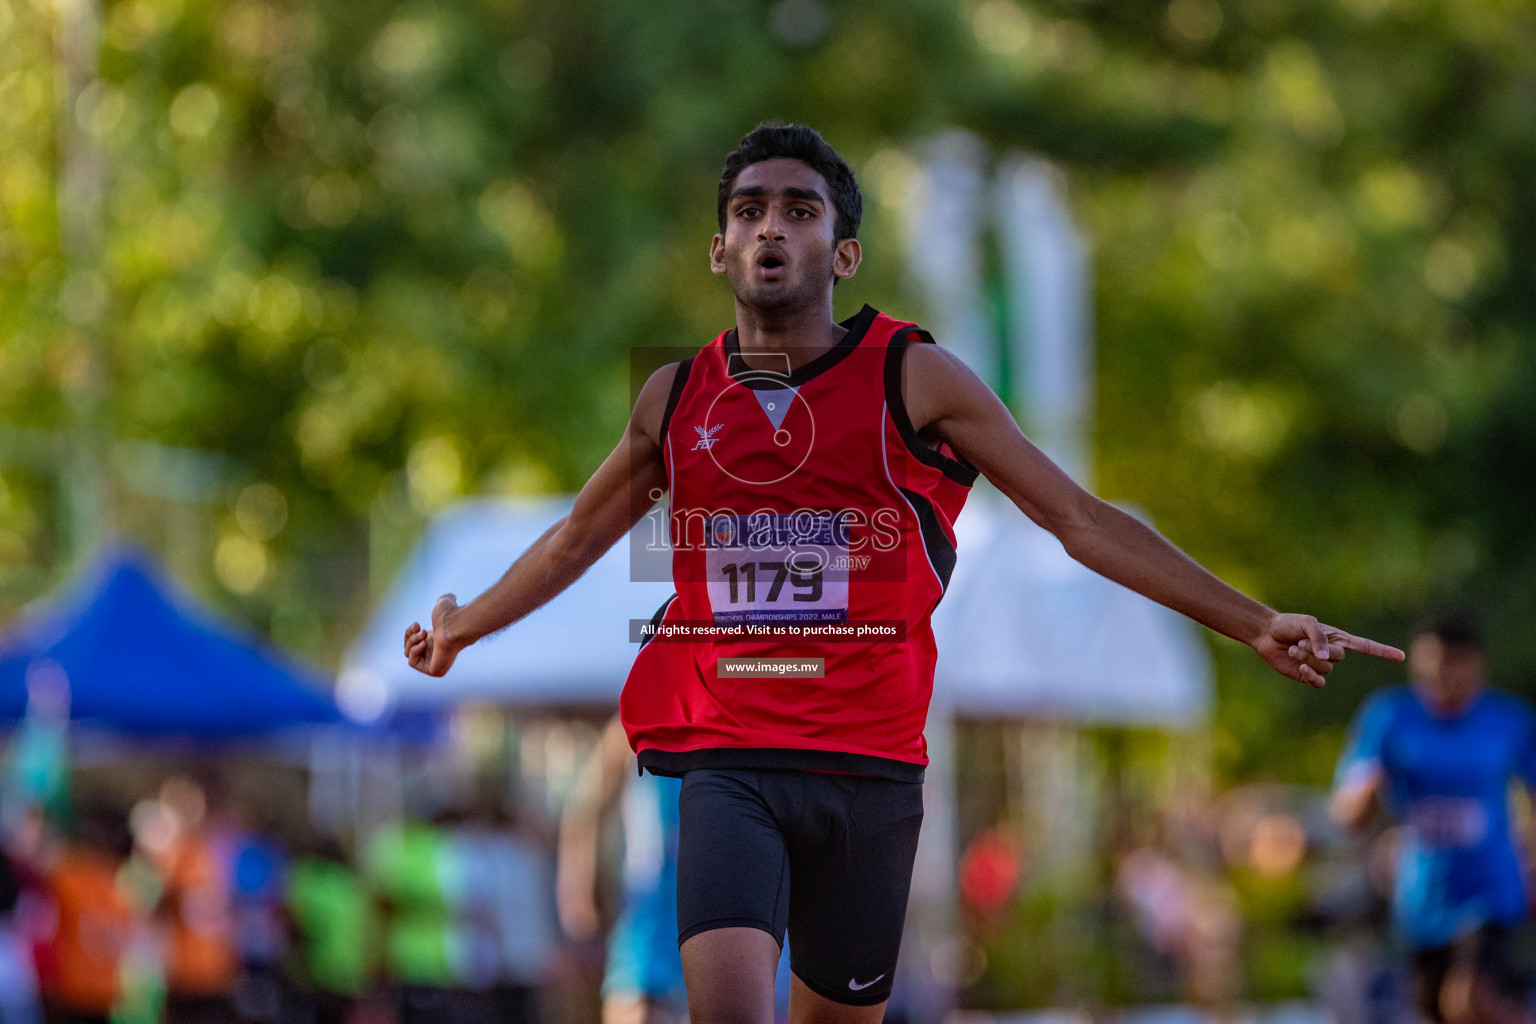 Day 5 of Inter-School Athletics Championship held in Male', Maldives on 27th May 2022. Photos by: Nausham Waheed / images.mv